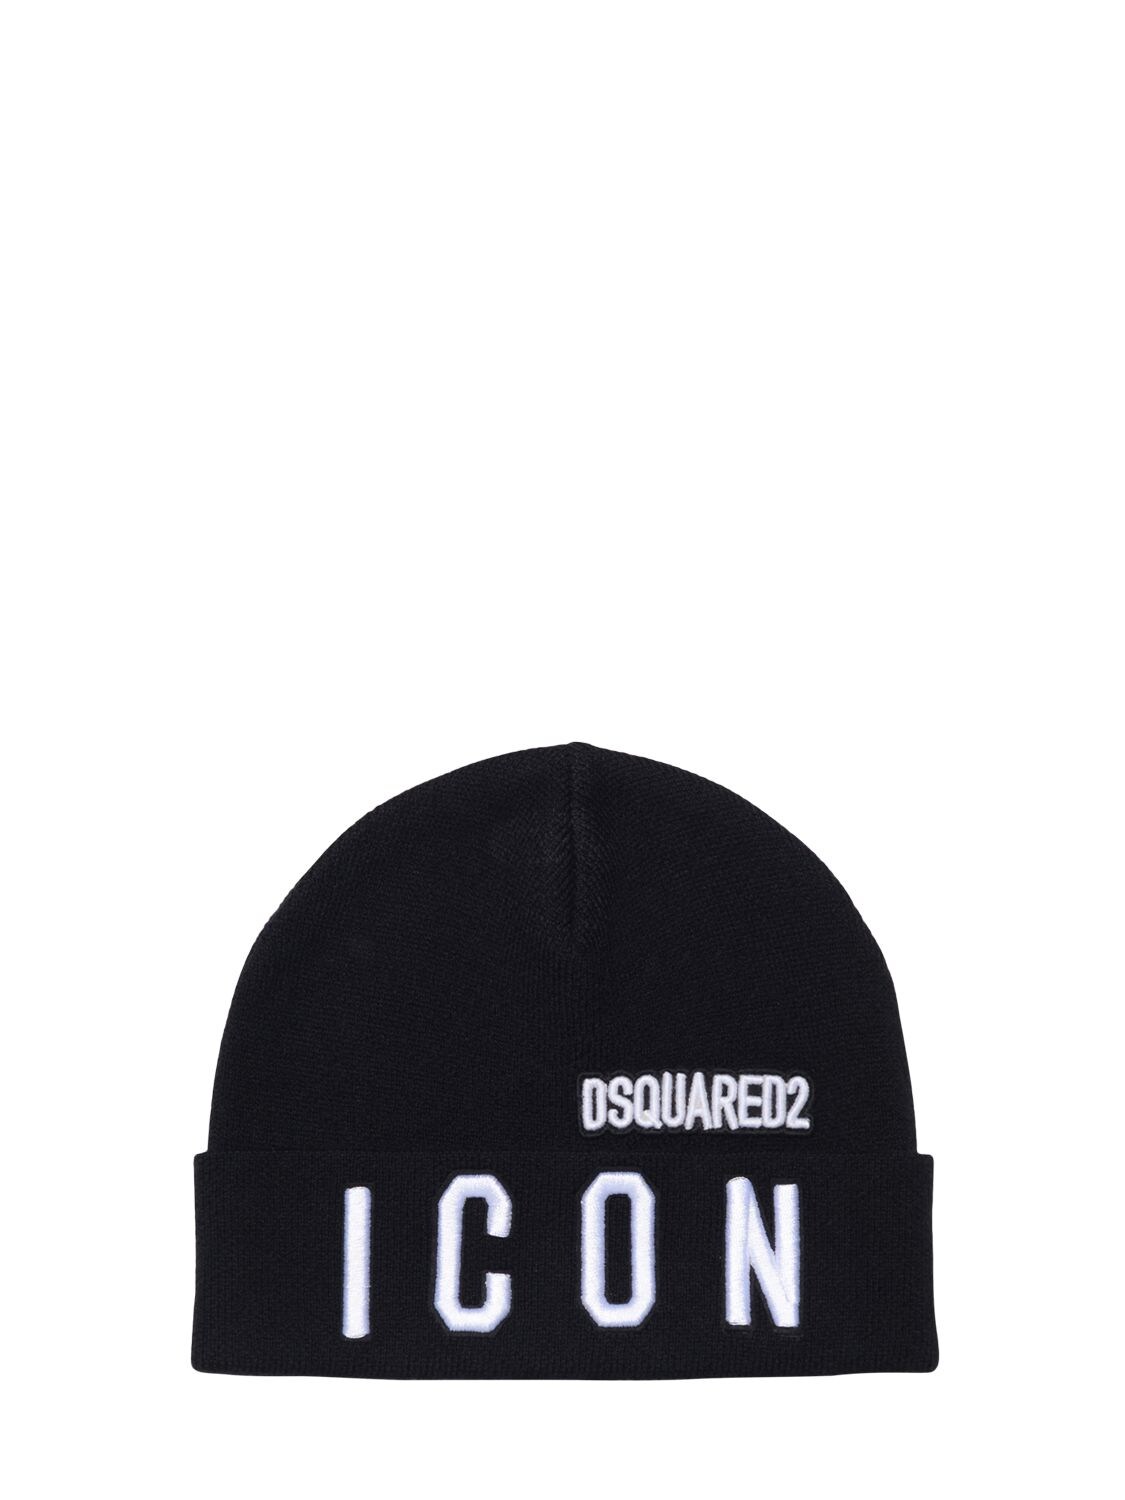 DSQUARED2 ICON EMBROIDERED WOOL BLEND HAT,72ILXZ024-RFE5MDA1